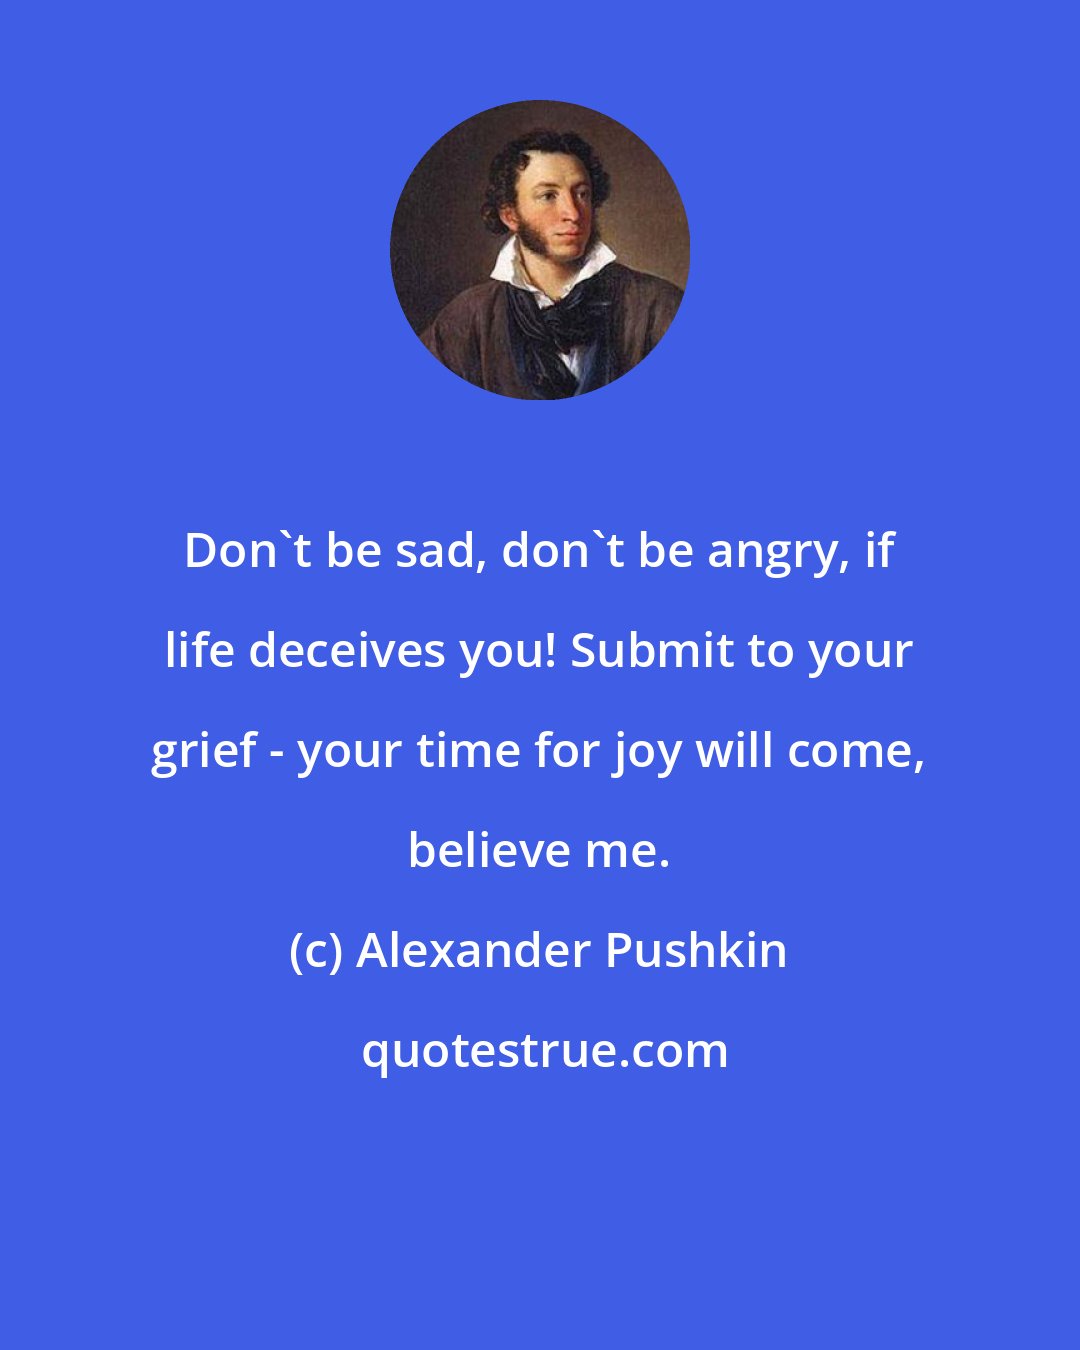 Alexander Pushkin: Don't be sad, don't be angry, if life deceives you! Submit to your grief - your time for joy will come, believe me.